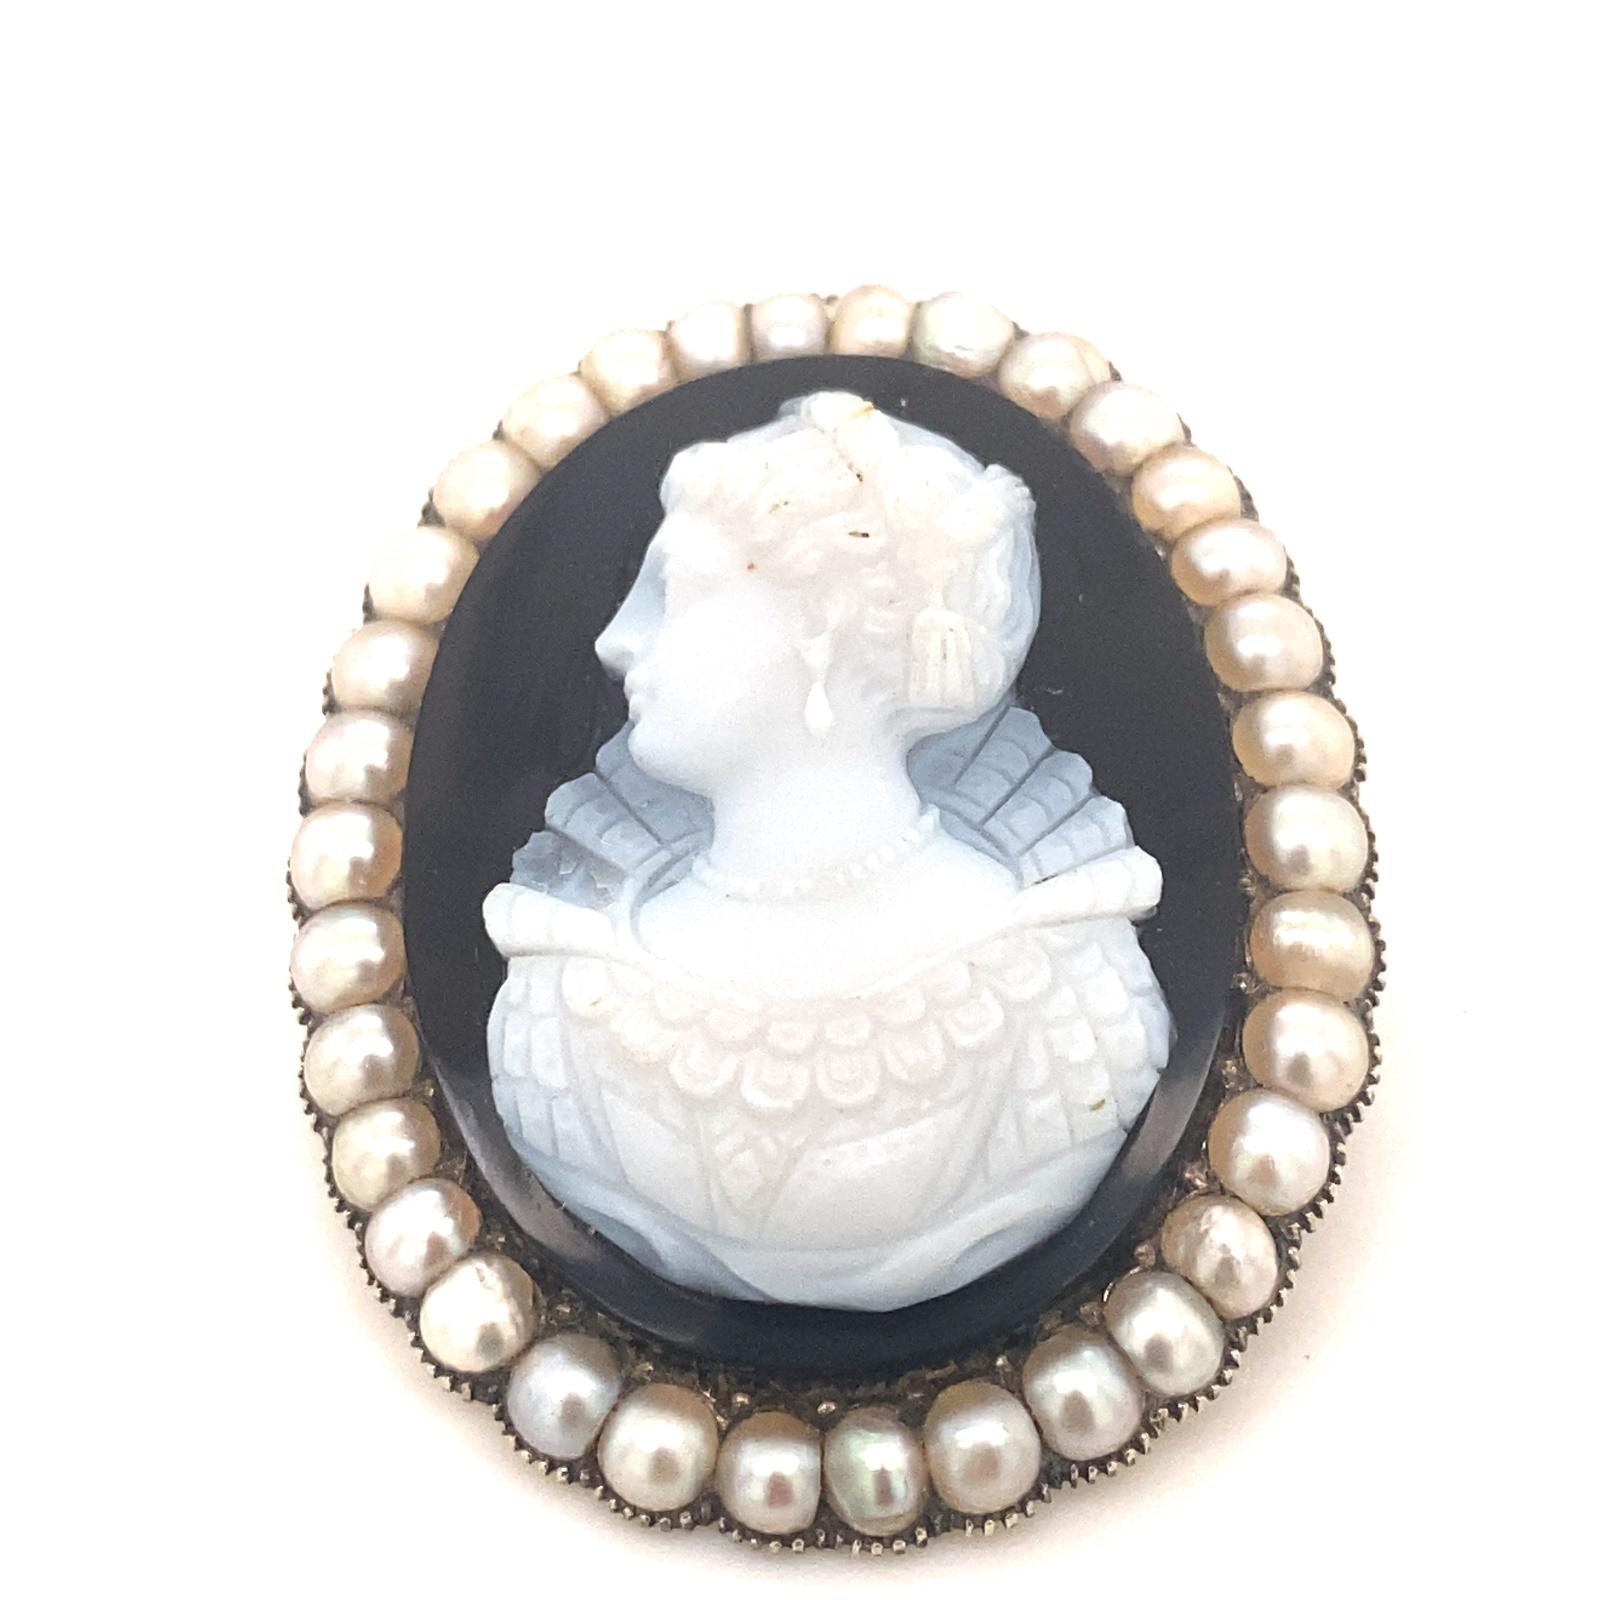 This is a stunning detailed hardstone cameo brooch set with a halo of pearls in 14k Gold.  The cameo depicts a detailed woman with Victorian clothes and jewelry. The brooch is set with 33 pearls that have nice luster.  The brooch measures 36mm wide